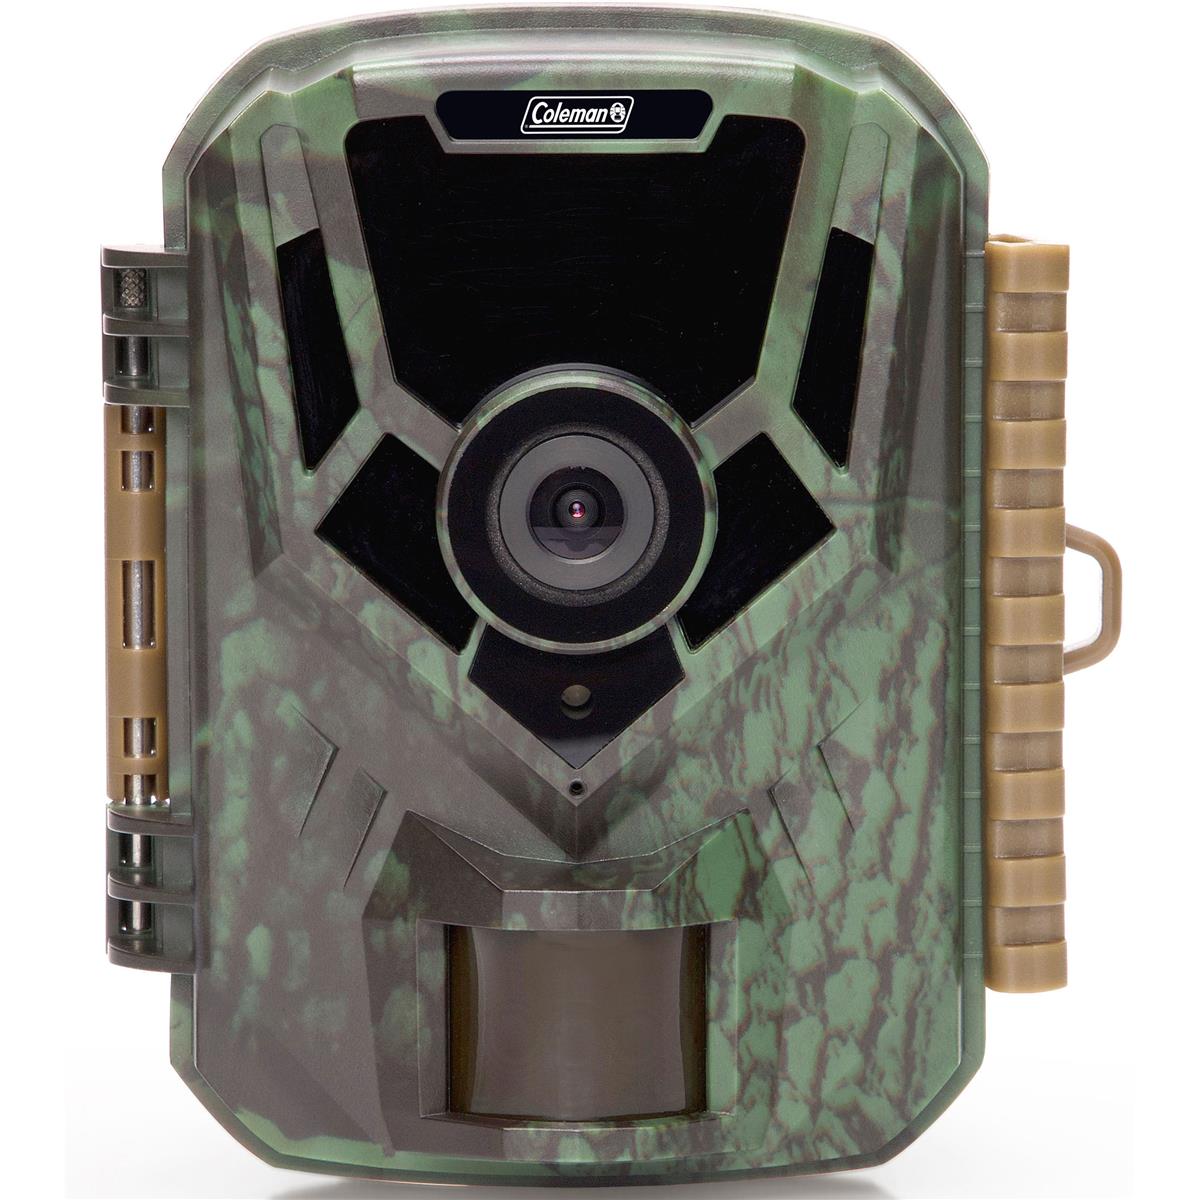 Image of Coleman XtremeTrail 20MP 1080p Waterproof Game/Hunting Camera